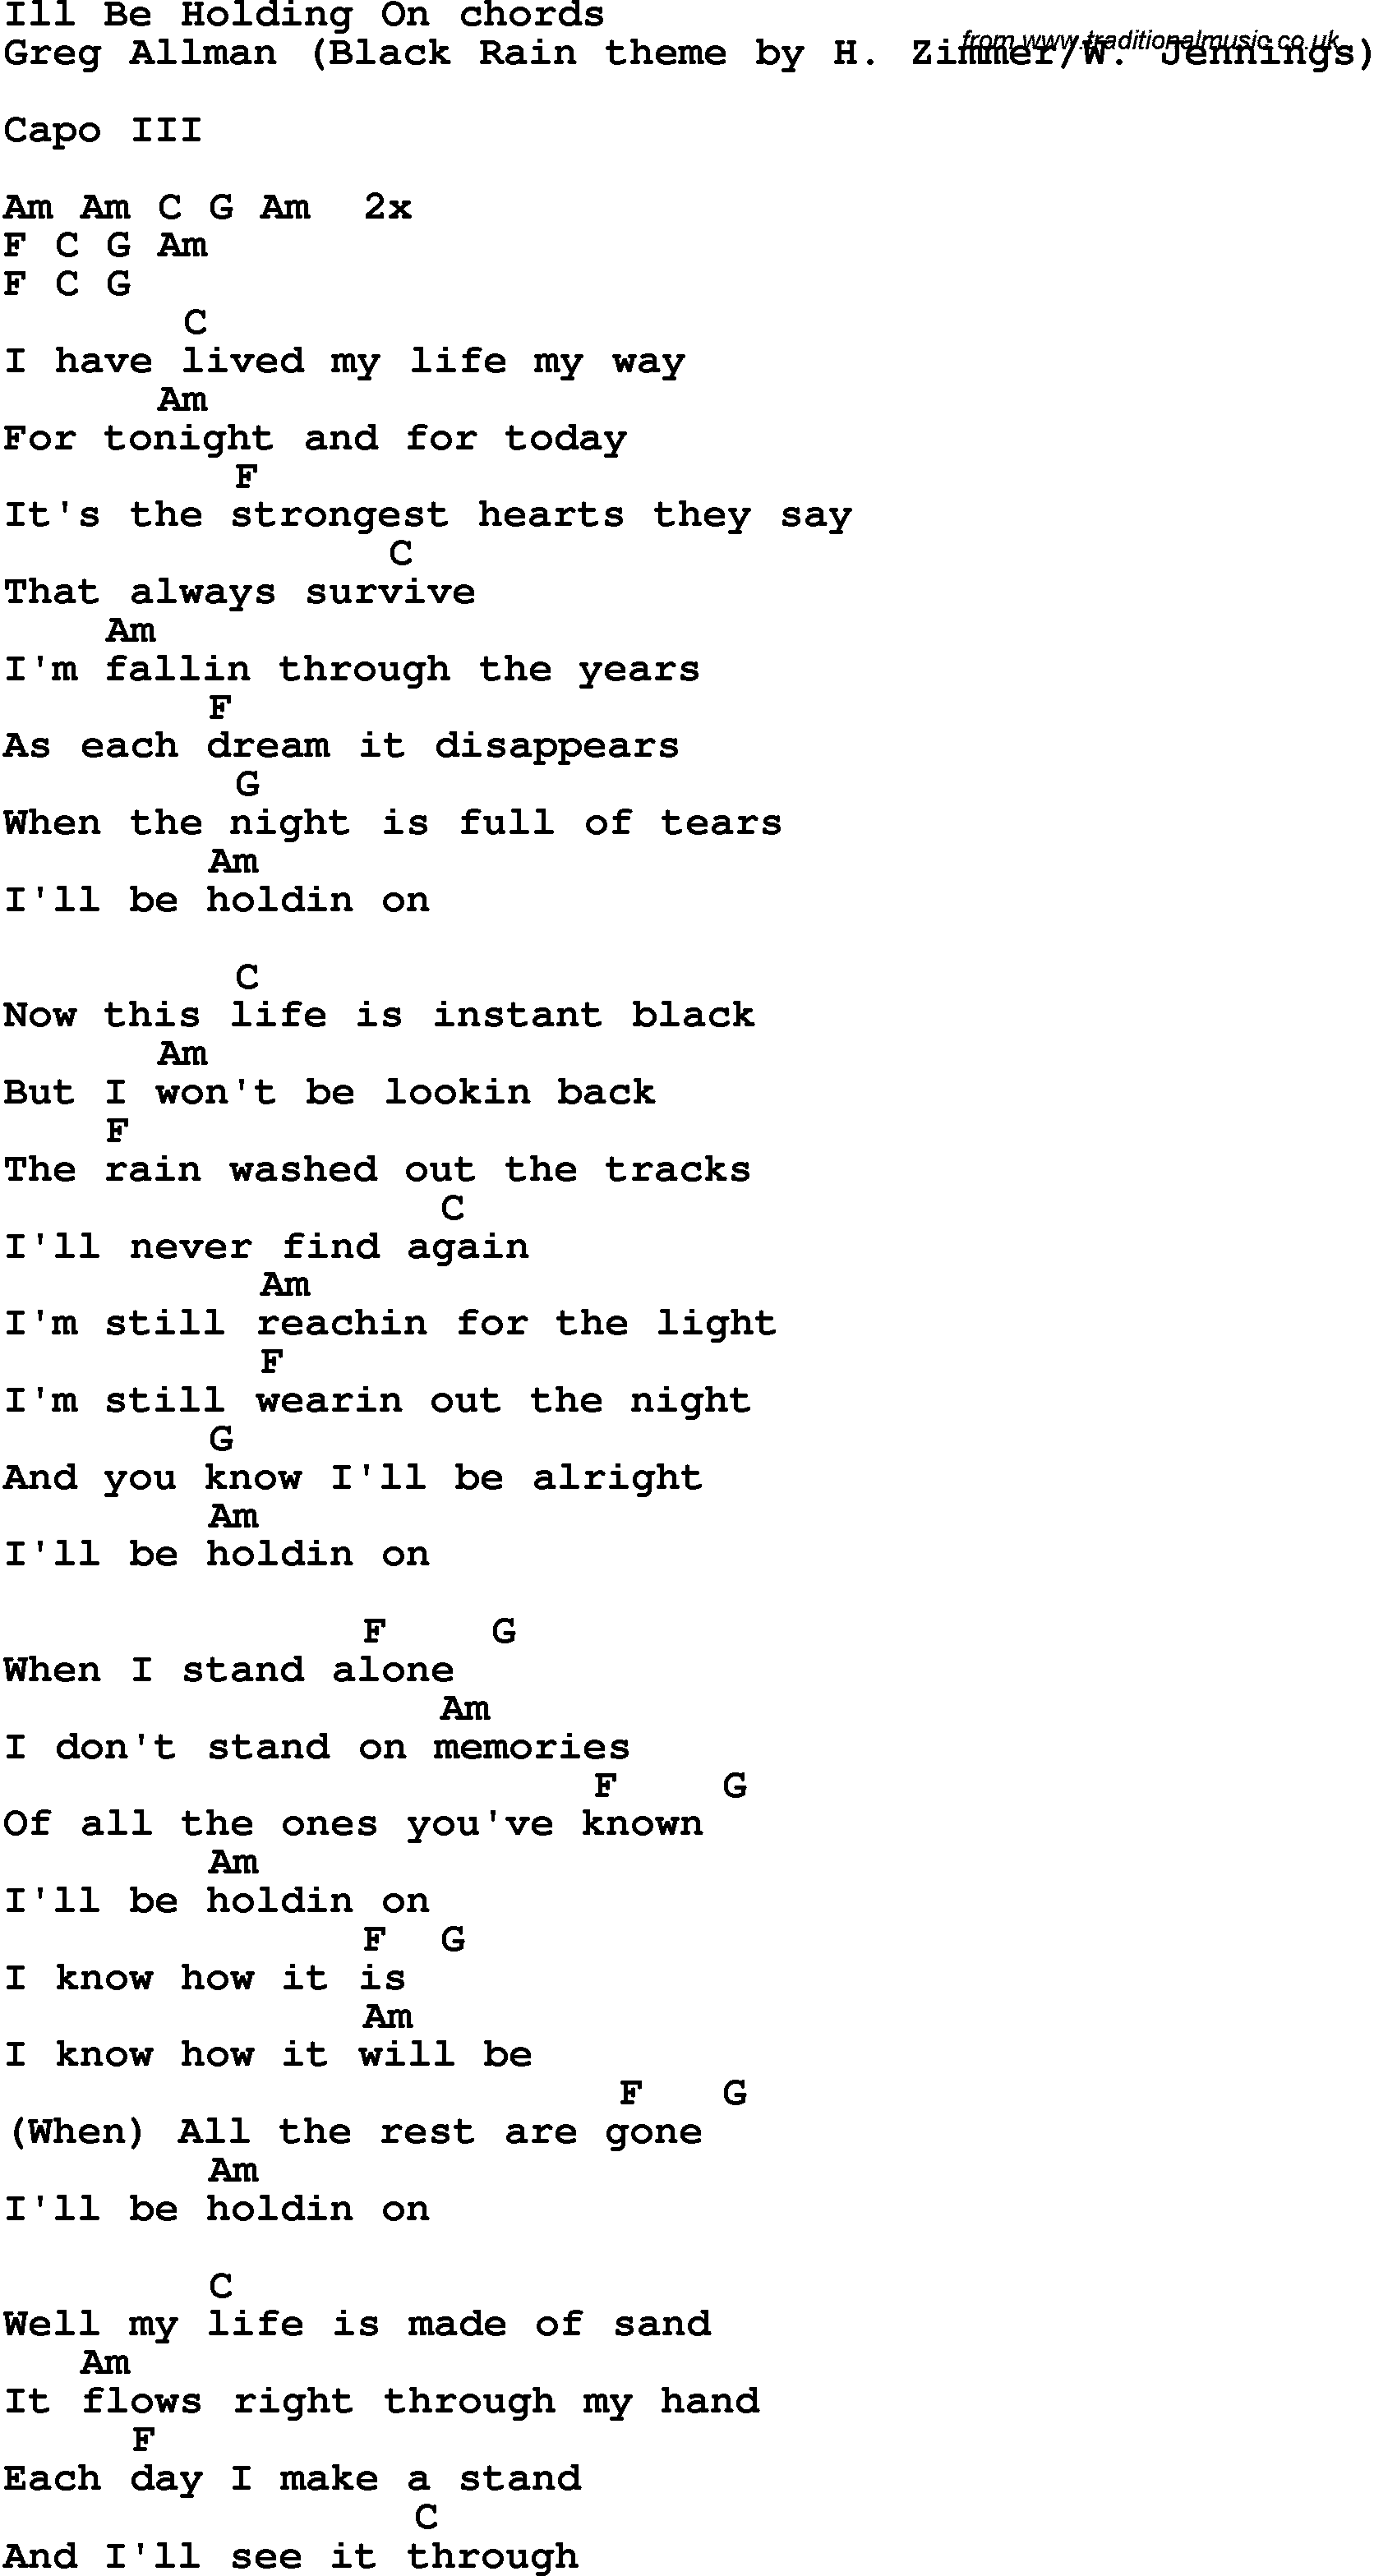 Song Lyrics with guitar chords for I'll Be Holding On